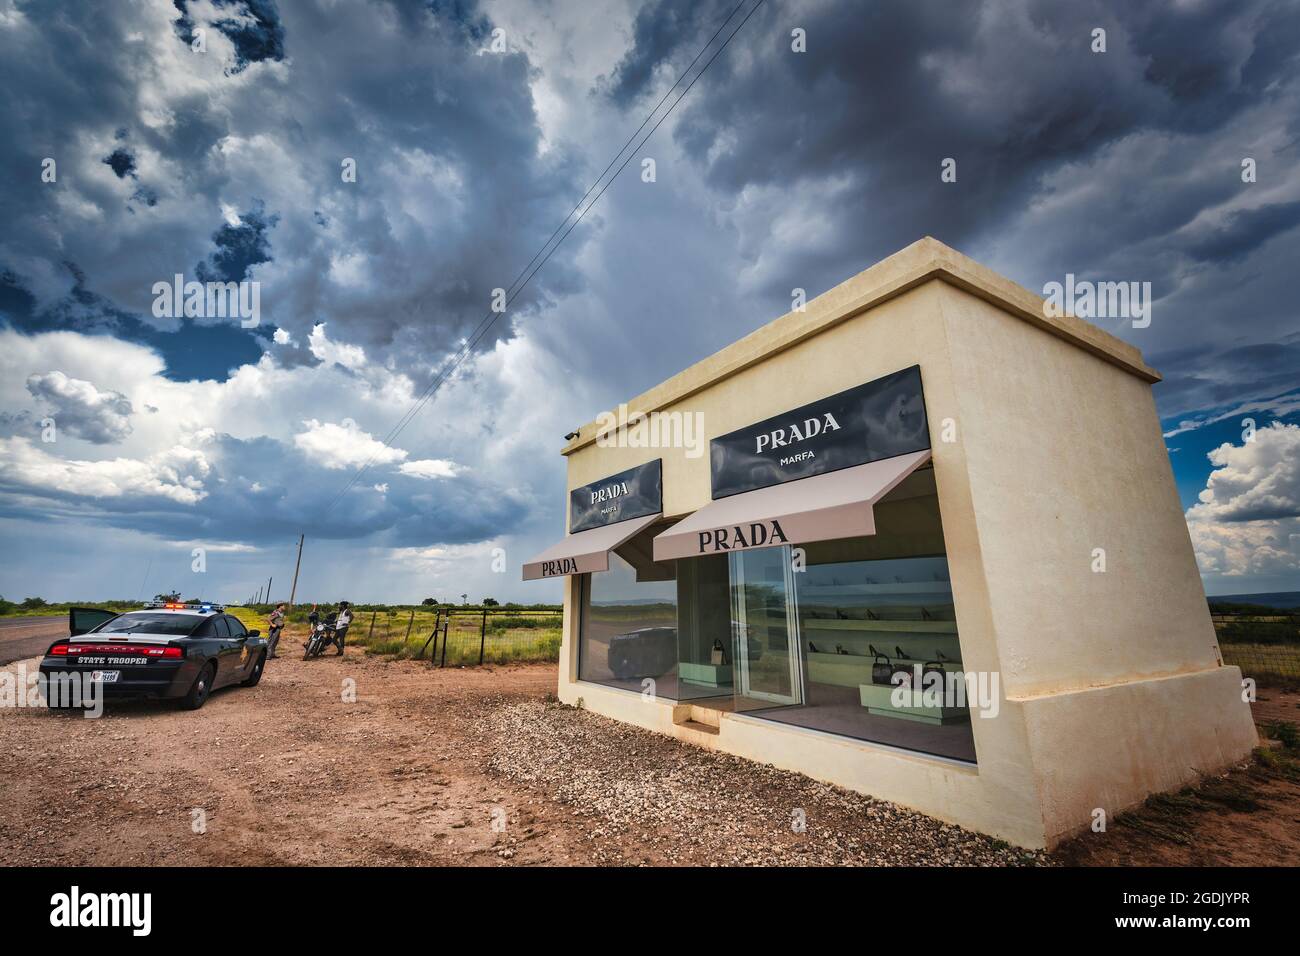 A Texas State Trooper talks with a motorcyclist near this Prada Marfa 'sculpture' designed to look like a Prada store located in Marfa, Texas northwes Stock Photo